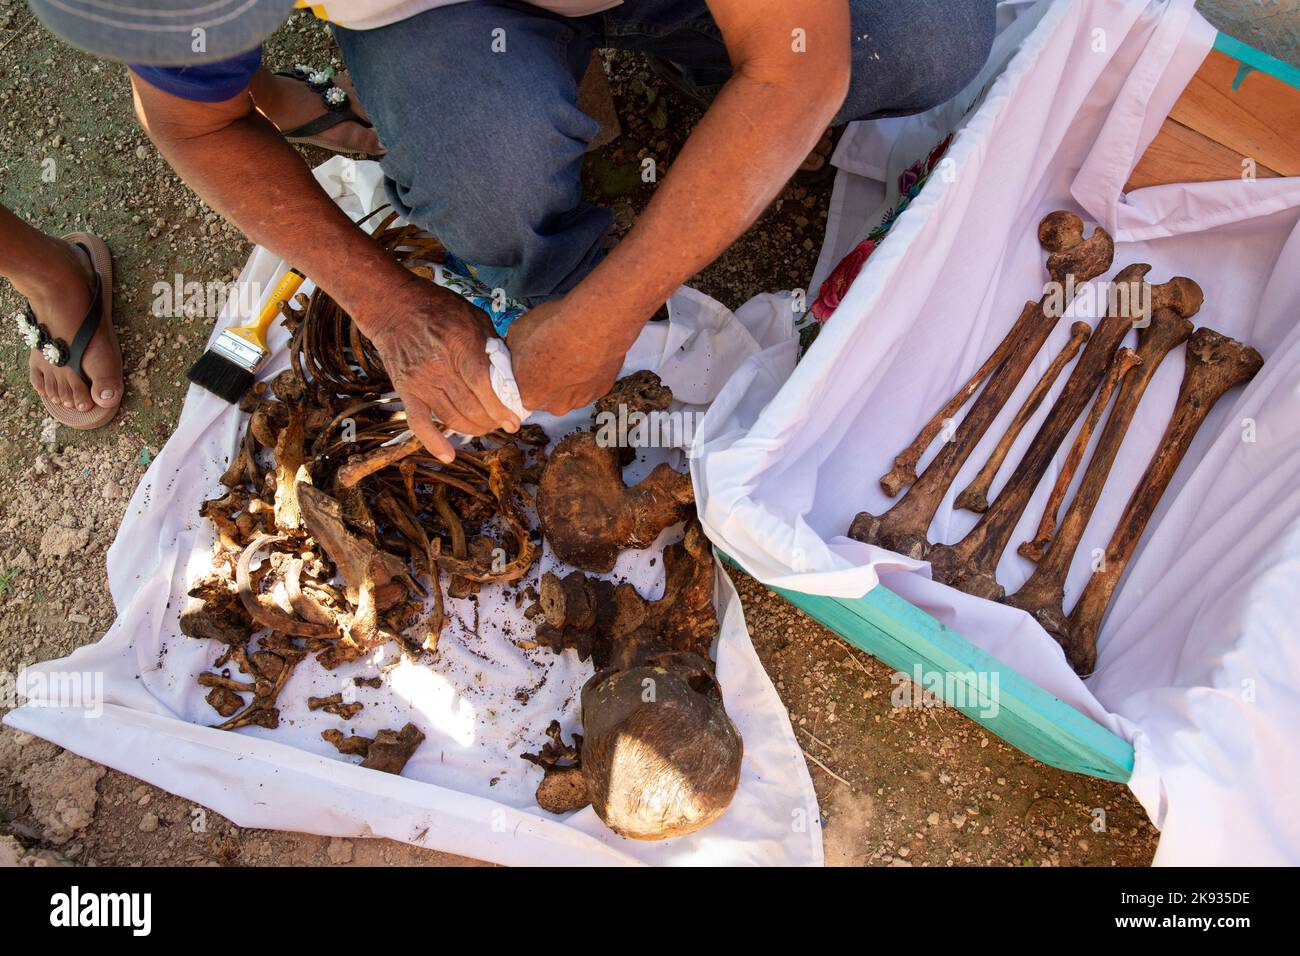 José Alfredo Yam Vargas cleans the bones and skull of his brother-in-law, who died in February 2019, at the cemetery of Pomuch, Campeche state, Mexico on October 22, 2022. Every year in preparation for Hanal Pixán, the Mayan Day of the Dead celebration, members of the Pomuch community in southeastern Mexico extract bones from their niches and carefully clean them – an ancestral tradition seen as a gesture of love and a way to get closer to deceased family members. This ritual, which in Mayan is known as Choo Ba’ak, can be done for the first time when a person has been dead for three years. Pom Stock Photo